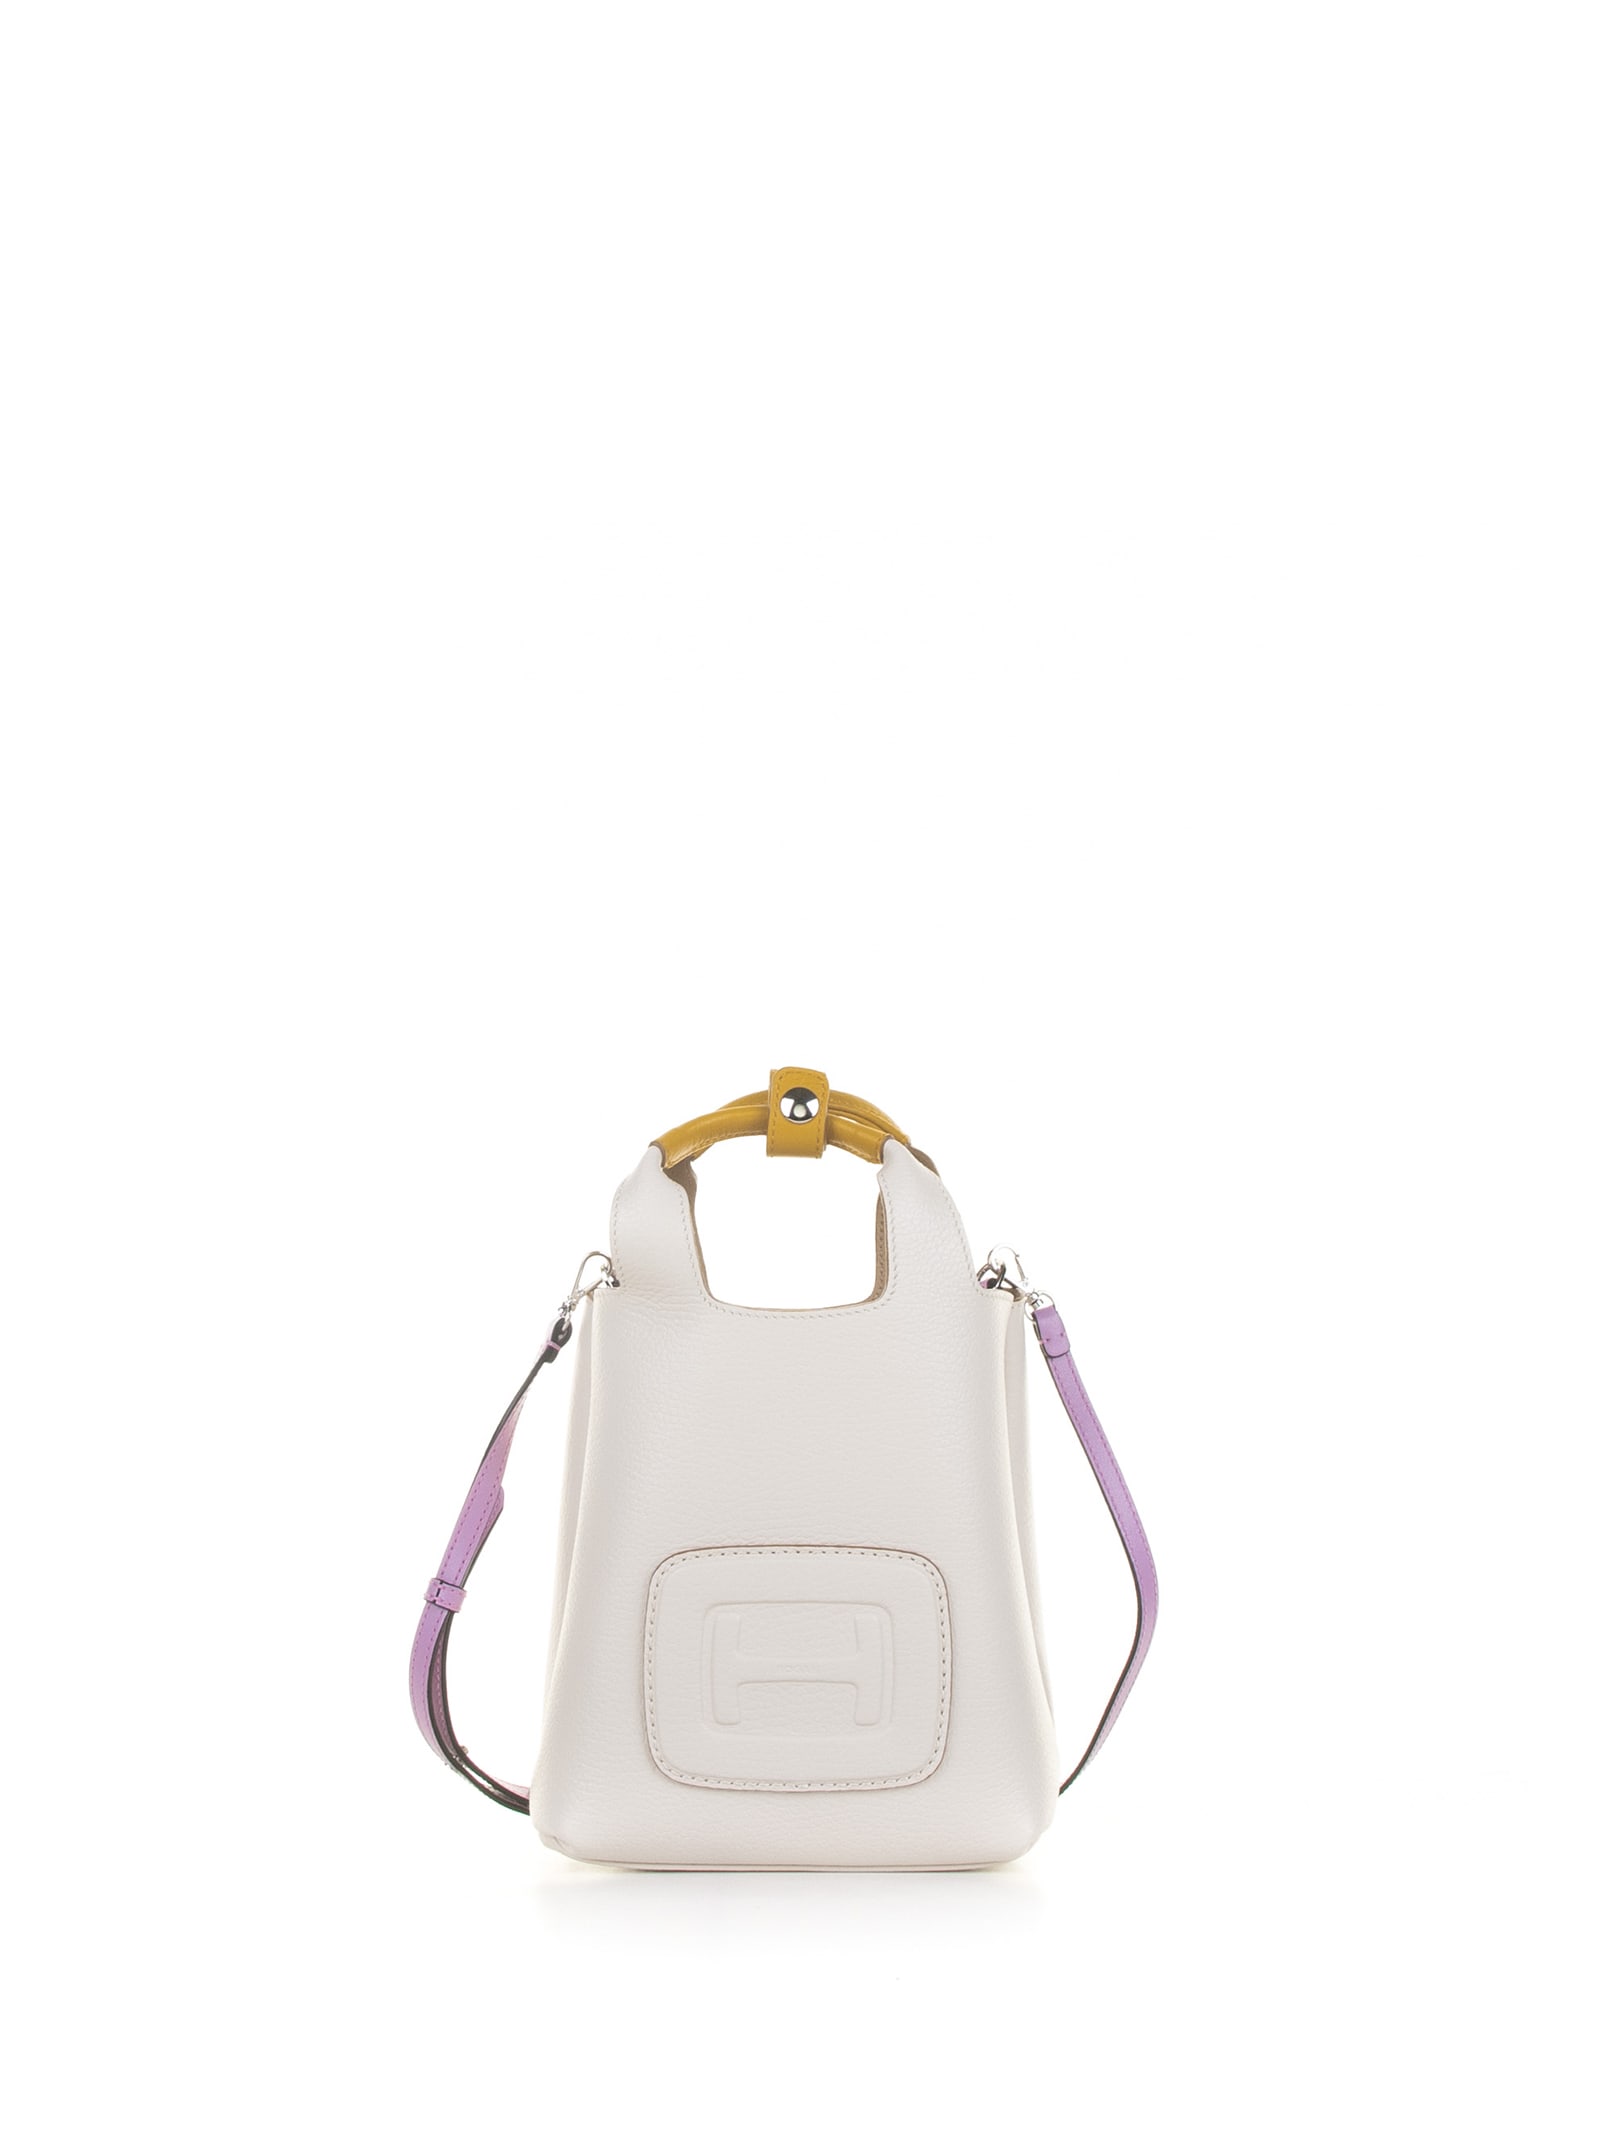 Hogan Mini White Leather Shopping Bag With Shoulder Strap In Bianco Marmo